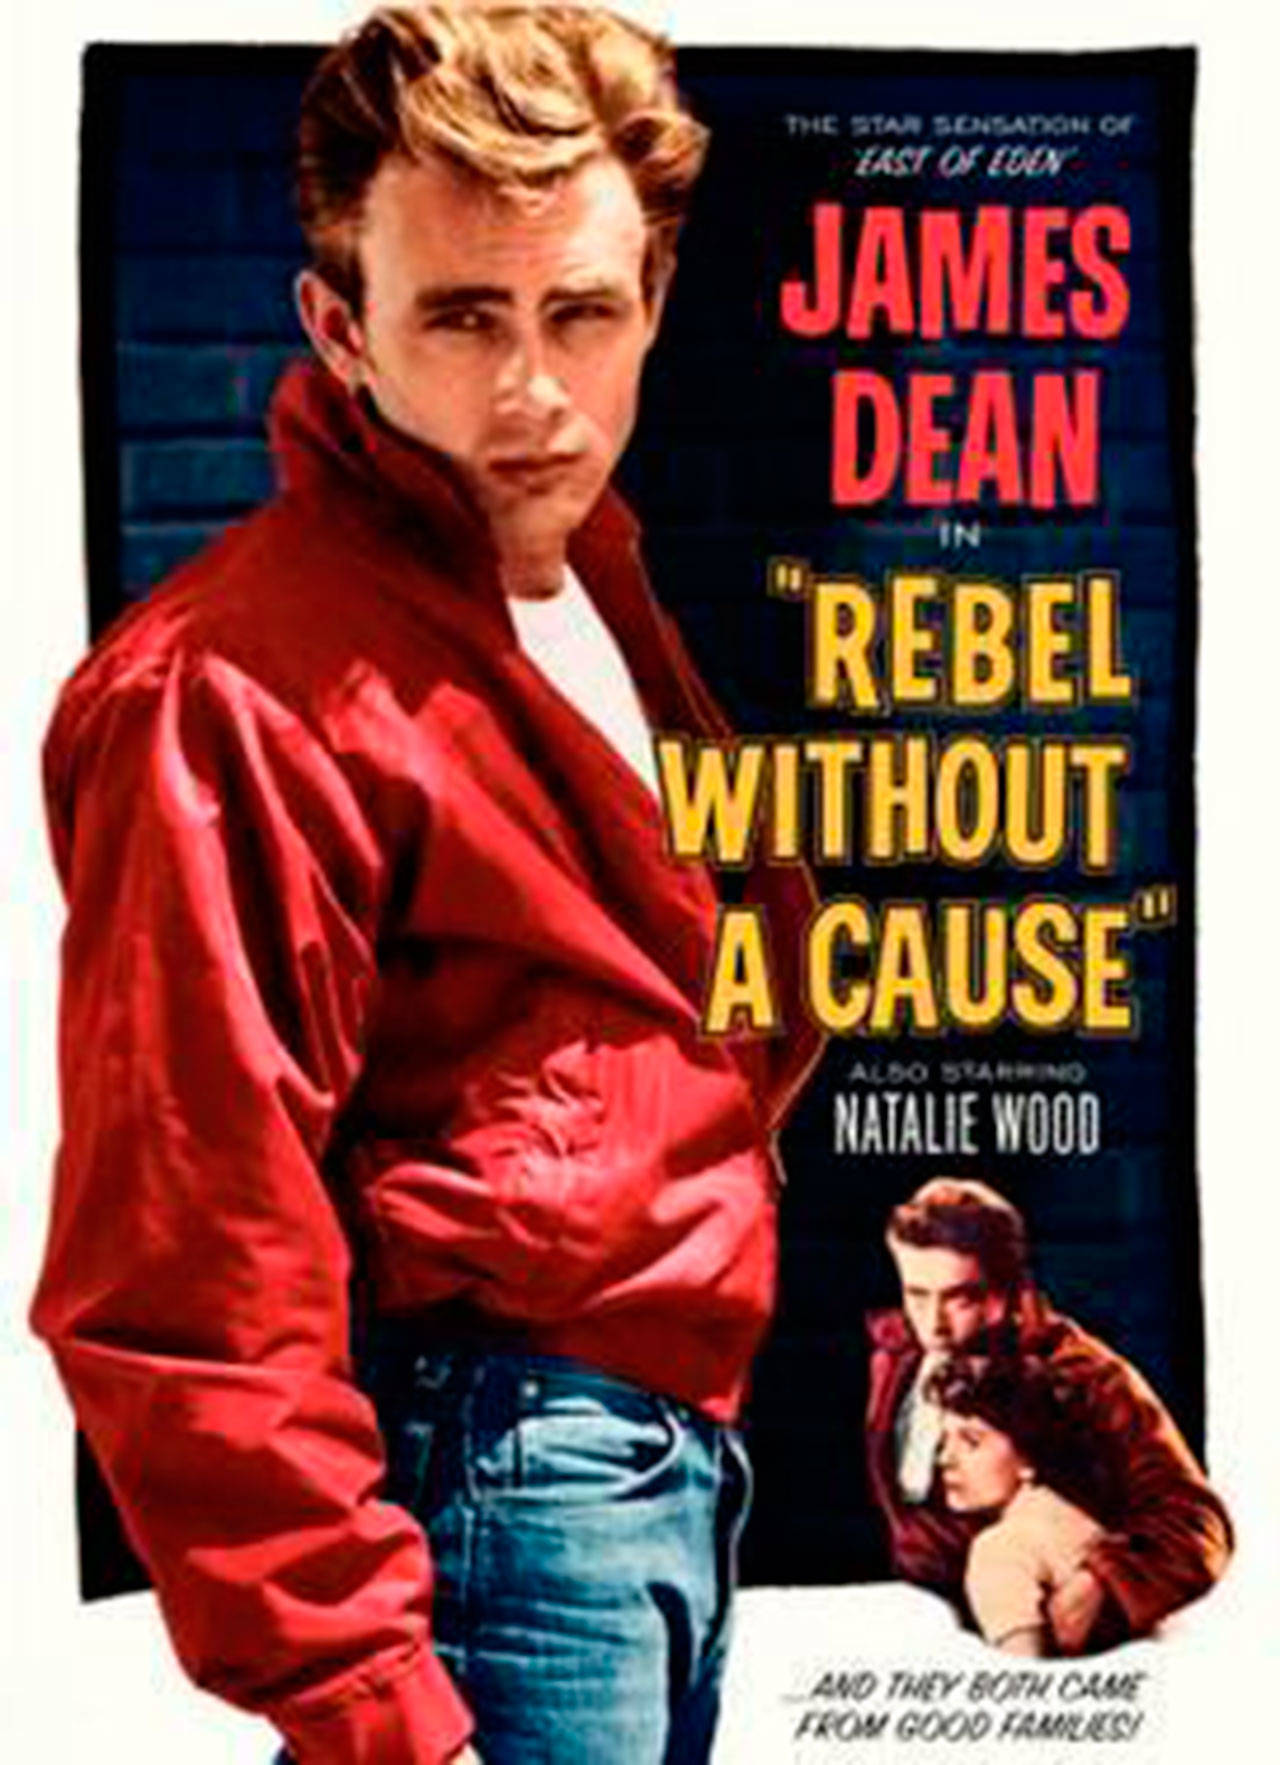 Image courtesy of Warner Bros. | “Rebel Without a Cause” (1955) will return to the big screen at Bainbridge Cinemas at 7 p.m. Wednesday, Sept. 26.